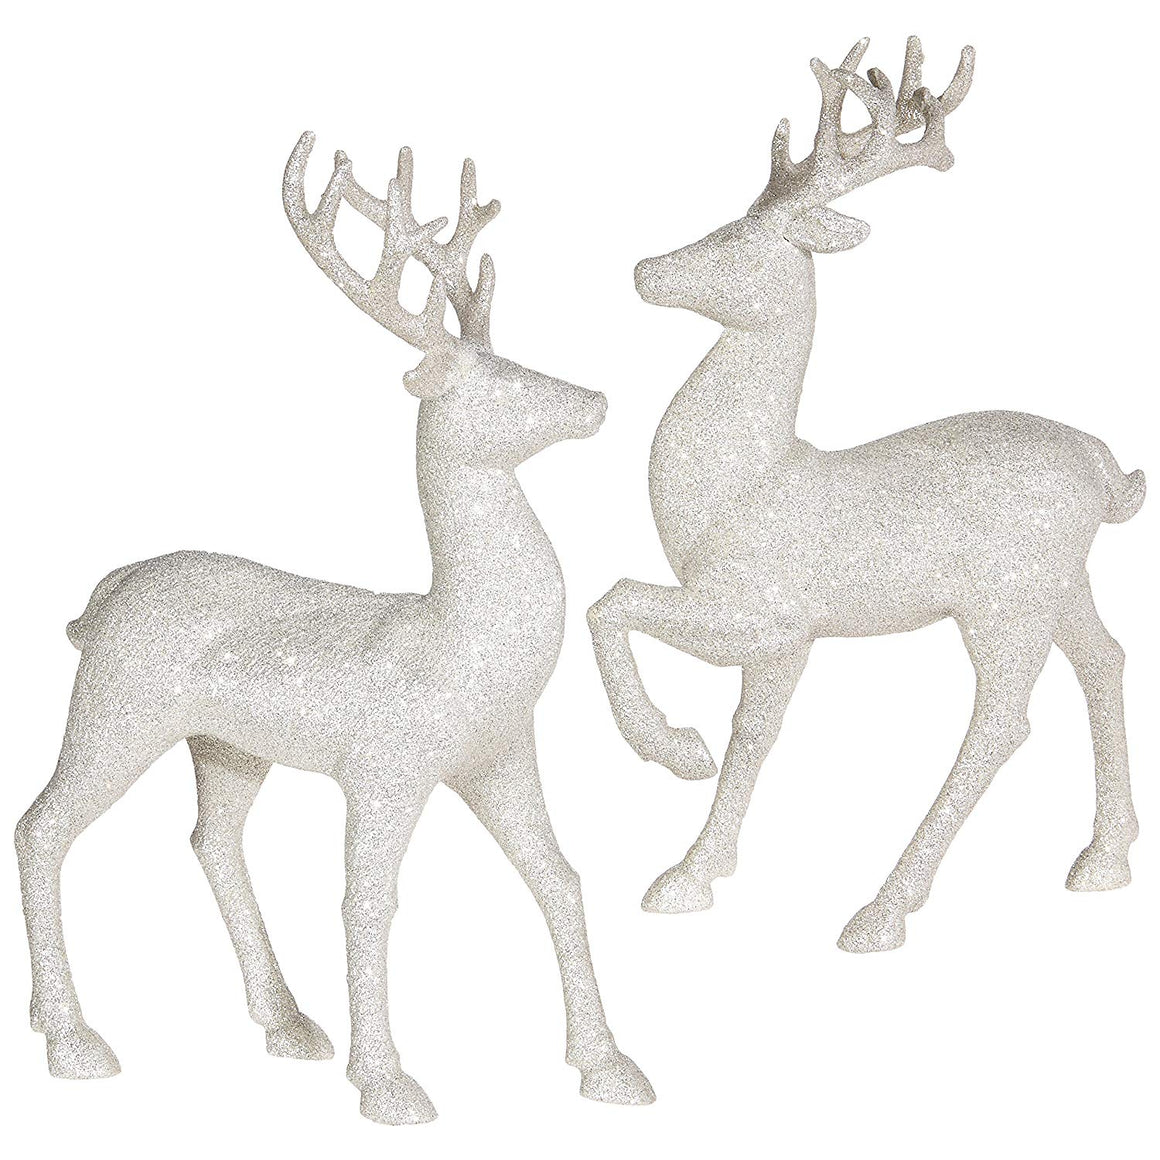 Set of 2 Holiday Reindeer Figures: 12.5 Inches Glitter Reindeer Decor by RAZ Imports (Silver)